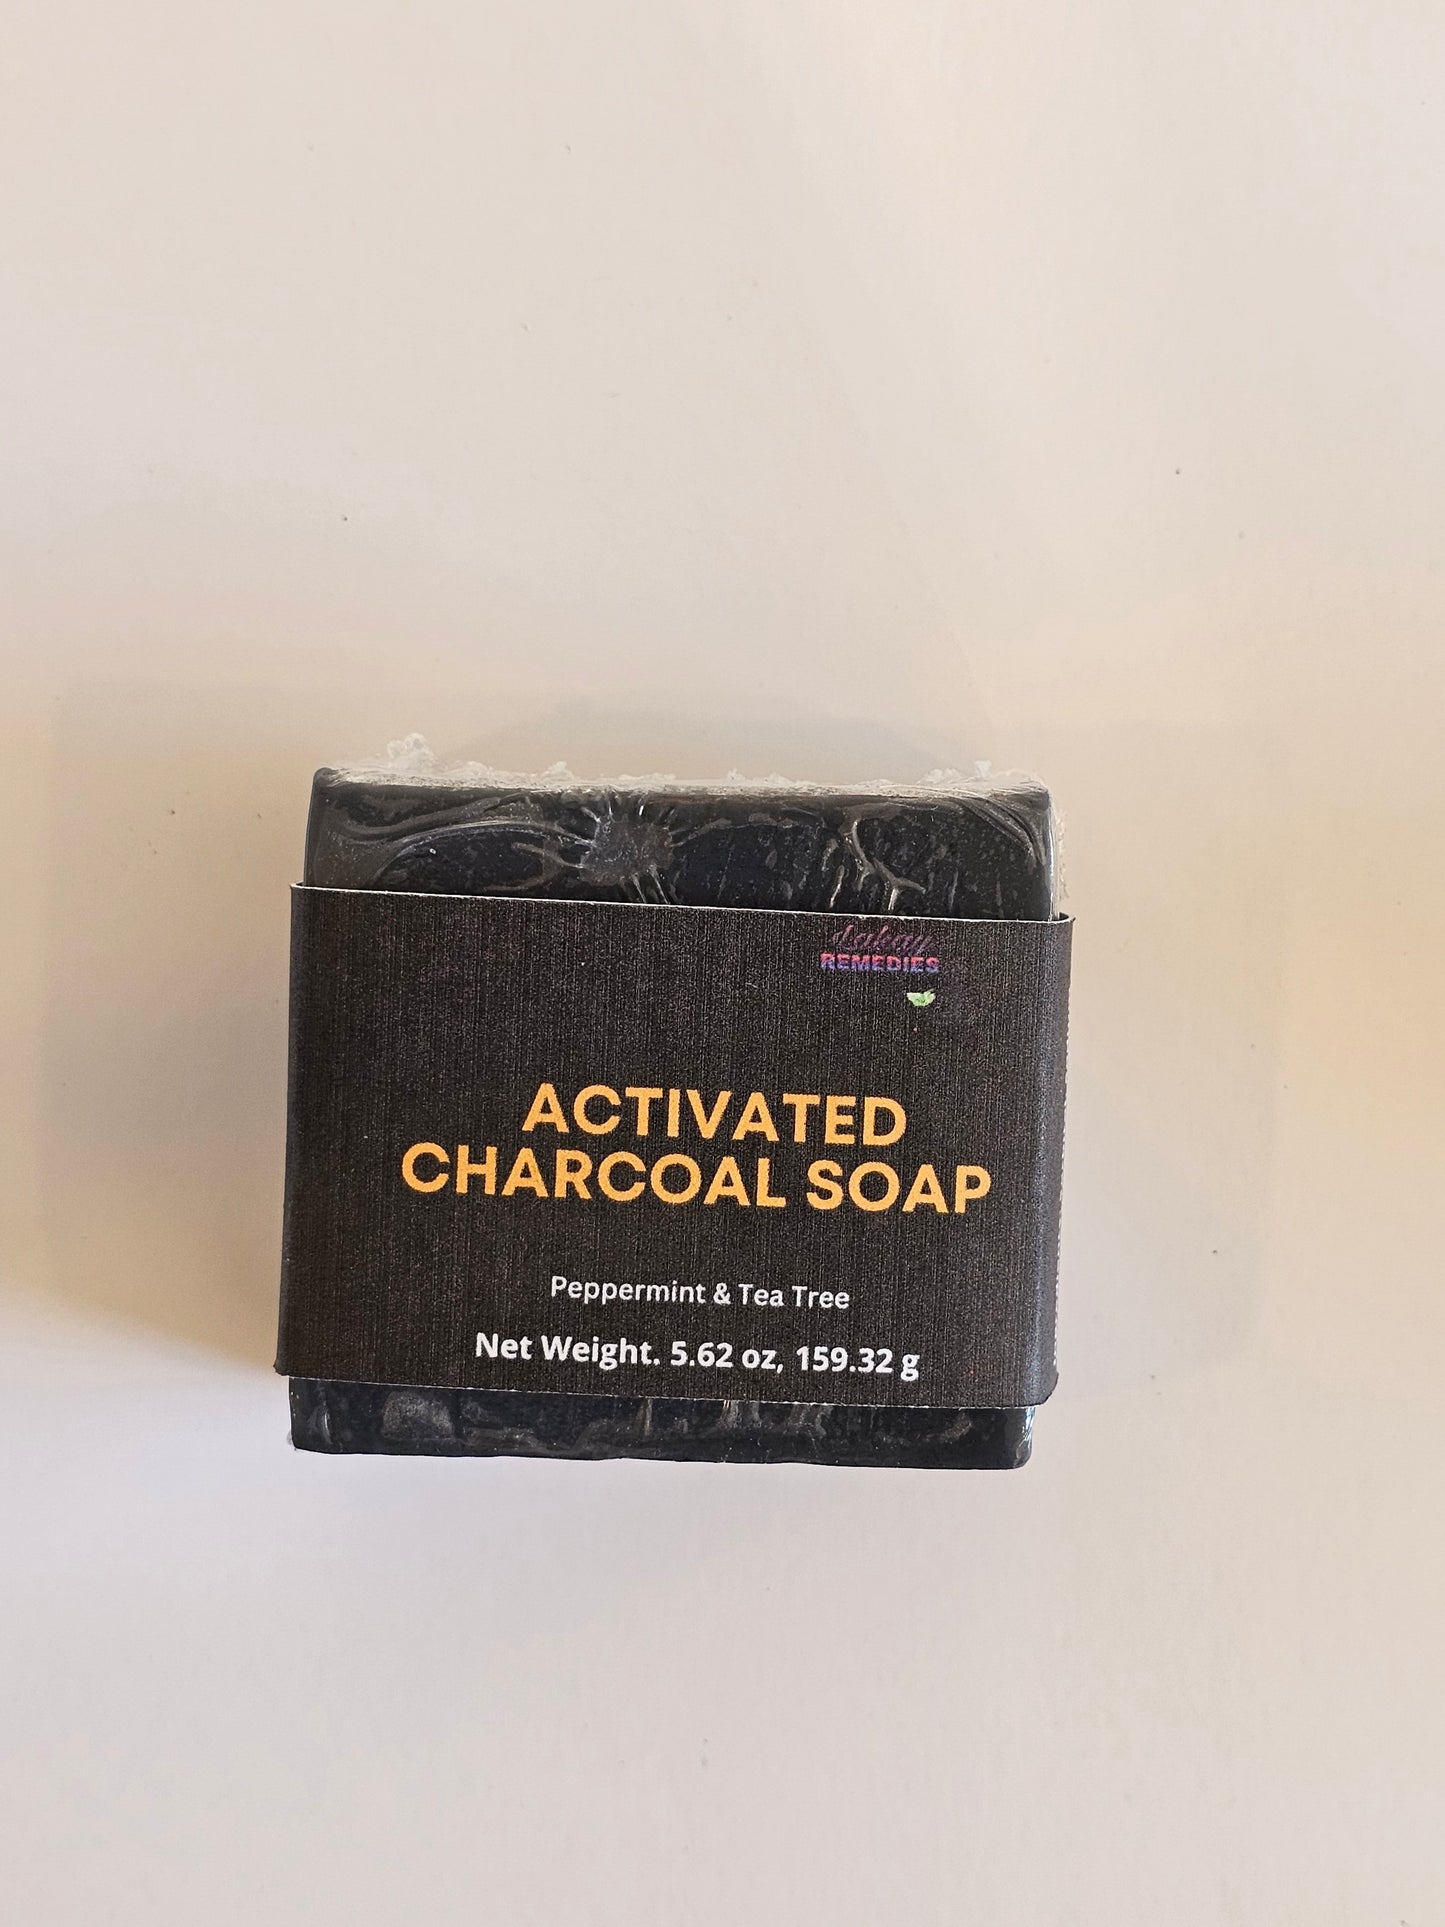 Peppermint & Tea Tree Activated Charcoal Soap